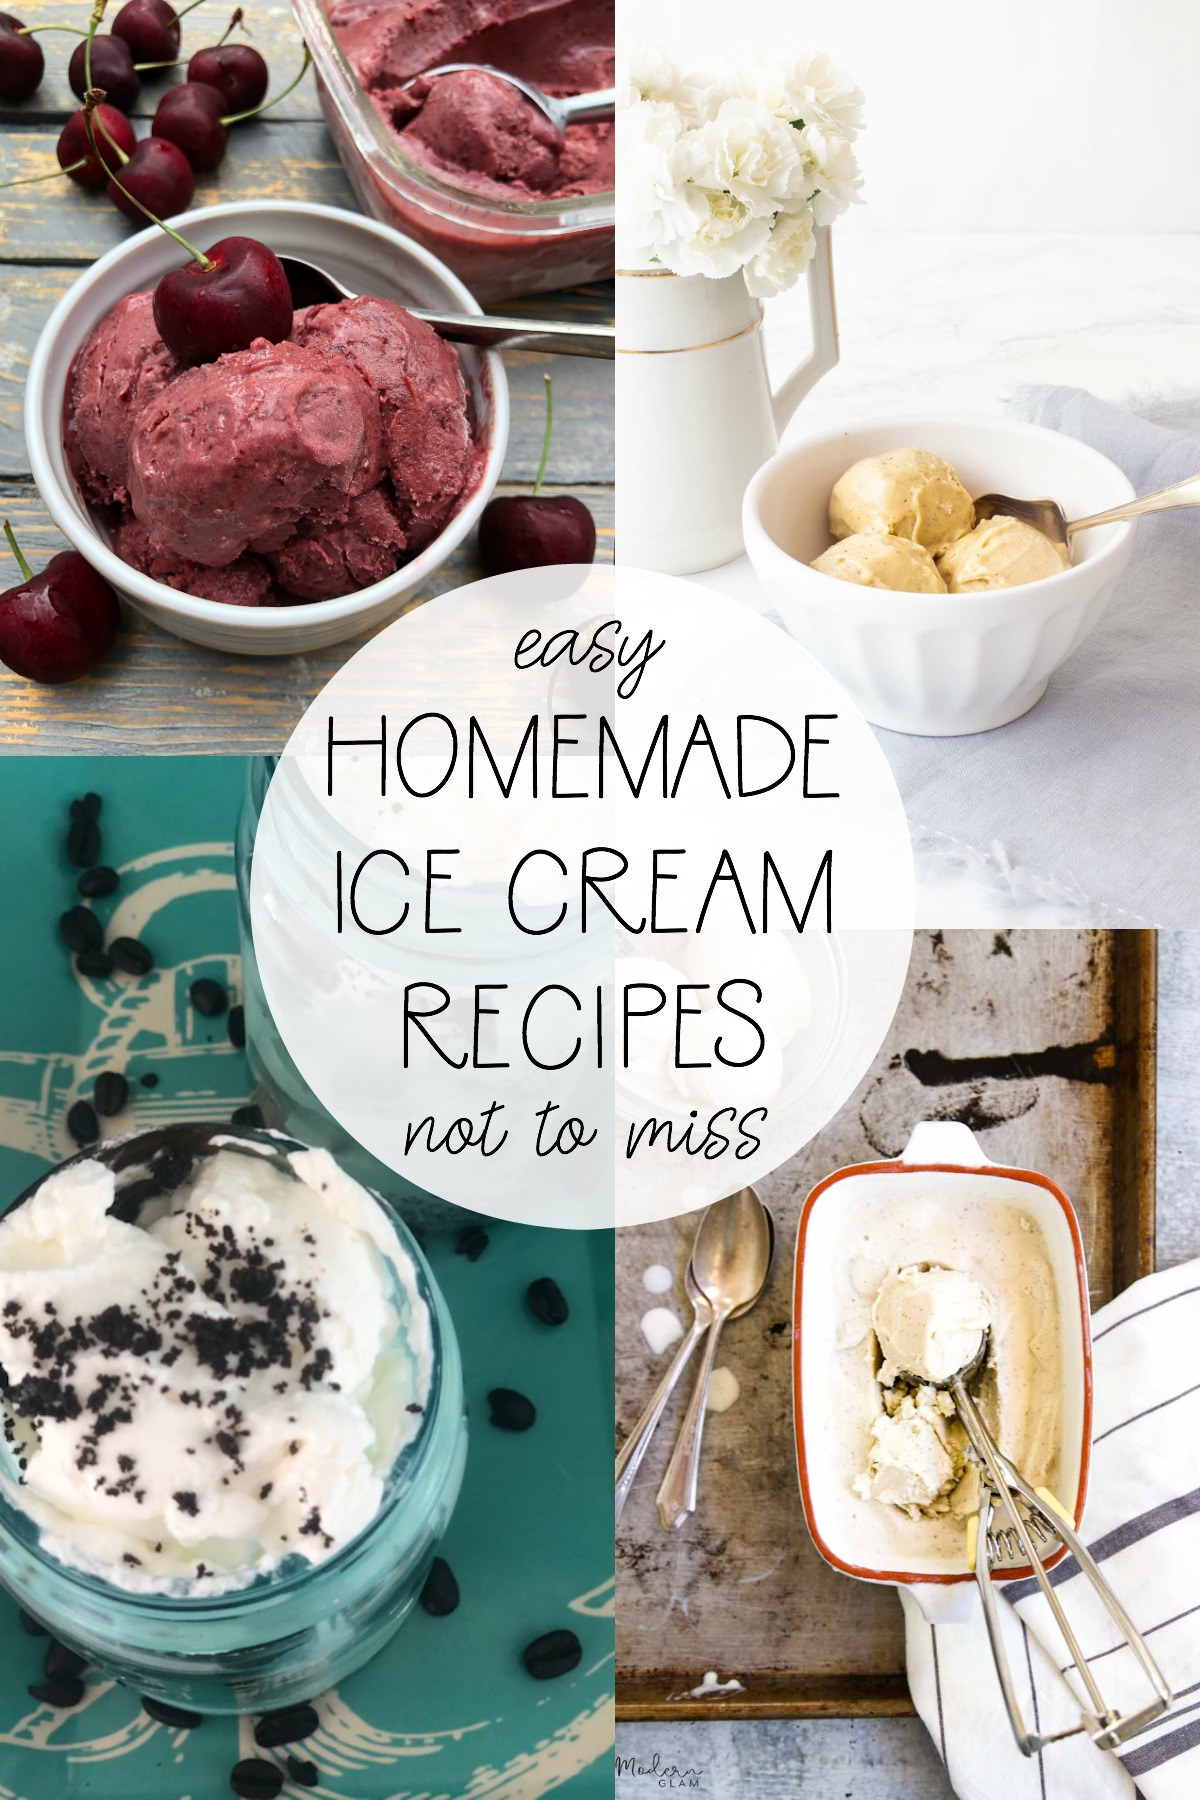 Easy homemade ice cream recipes not to miss poster.